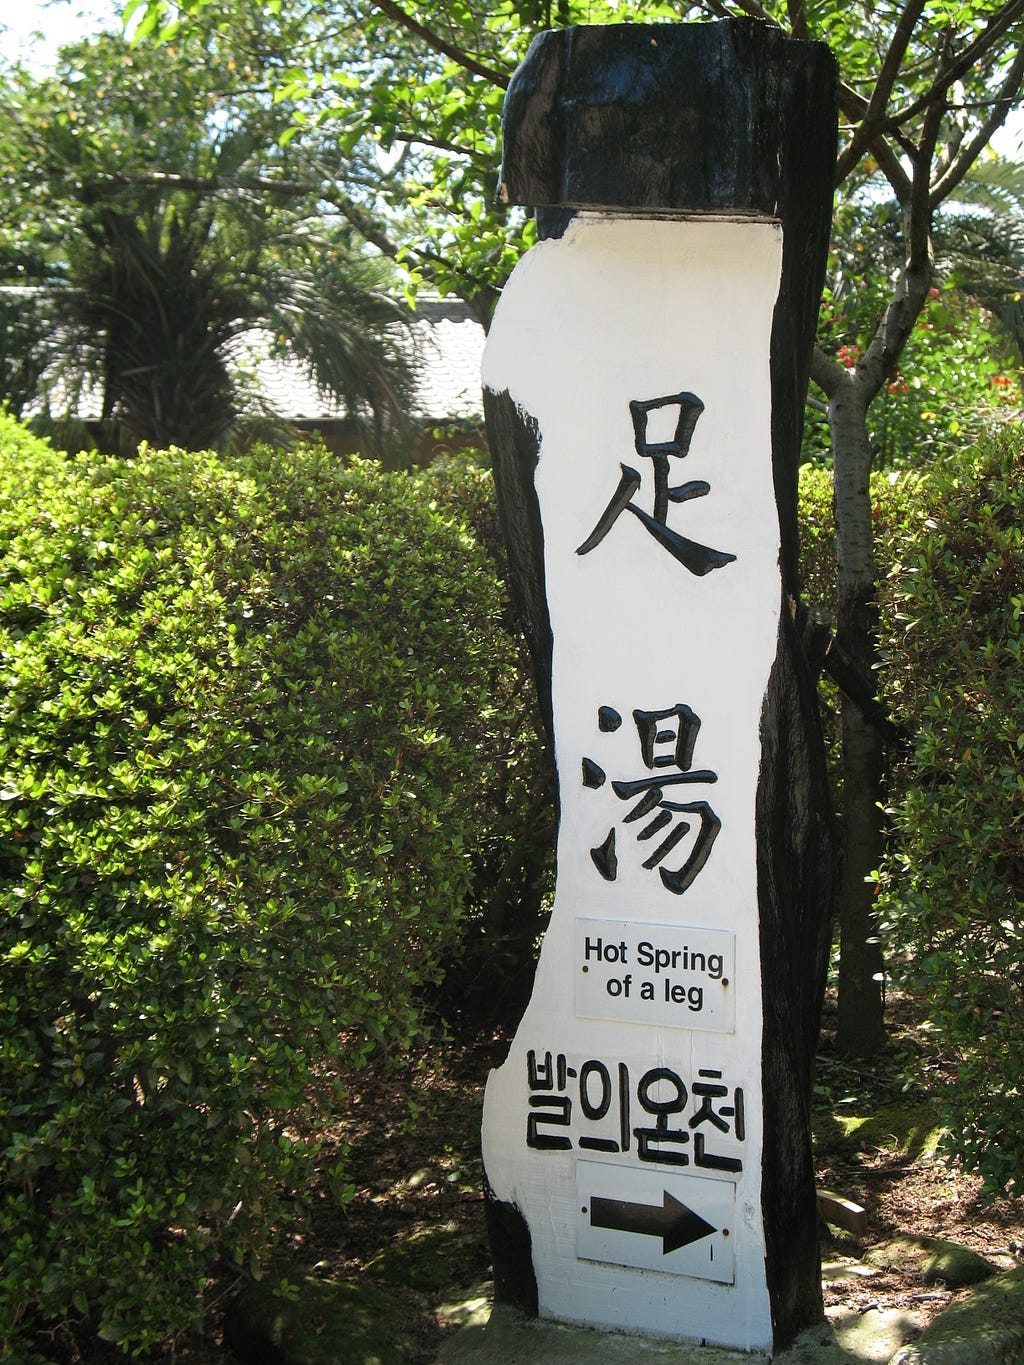 Photo of a standing wooden sign with an arrow pointing to the right. The wood is painted white. There are Japanese and Korean characters on it, as well as the English words “Hot Spring of a leg”.